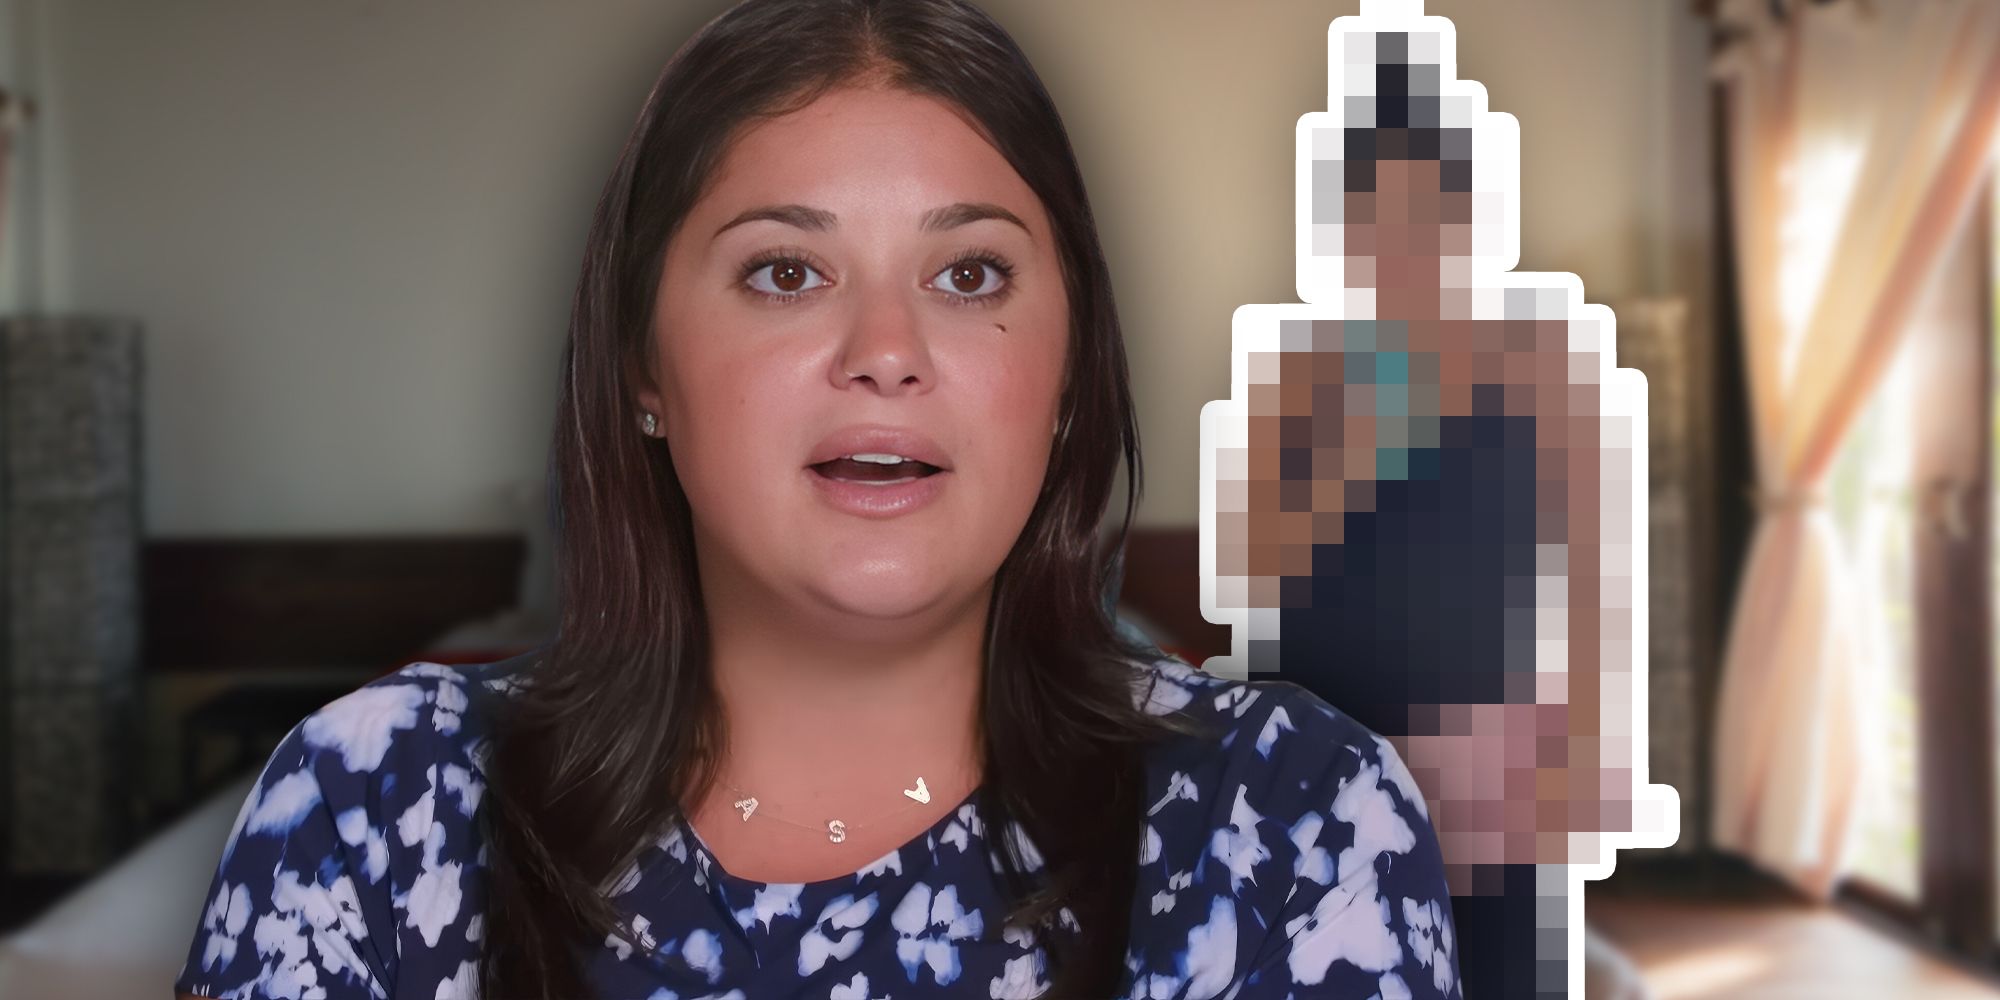 Loren Brovarnik from 90 Day Fiancé, with a pixelated version of Loren